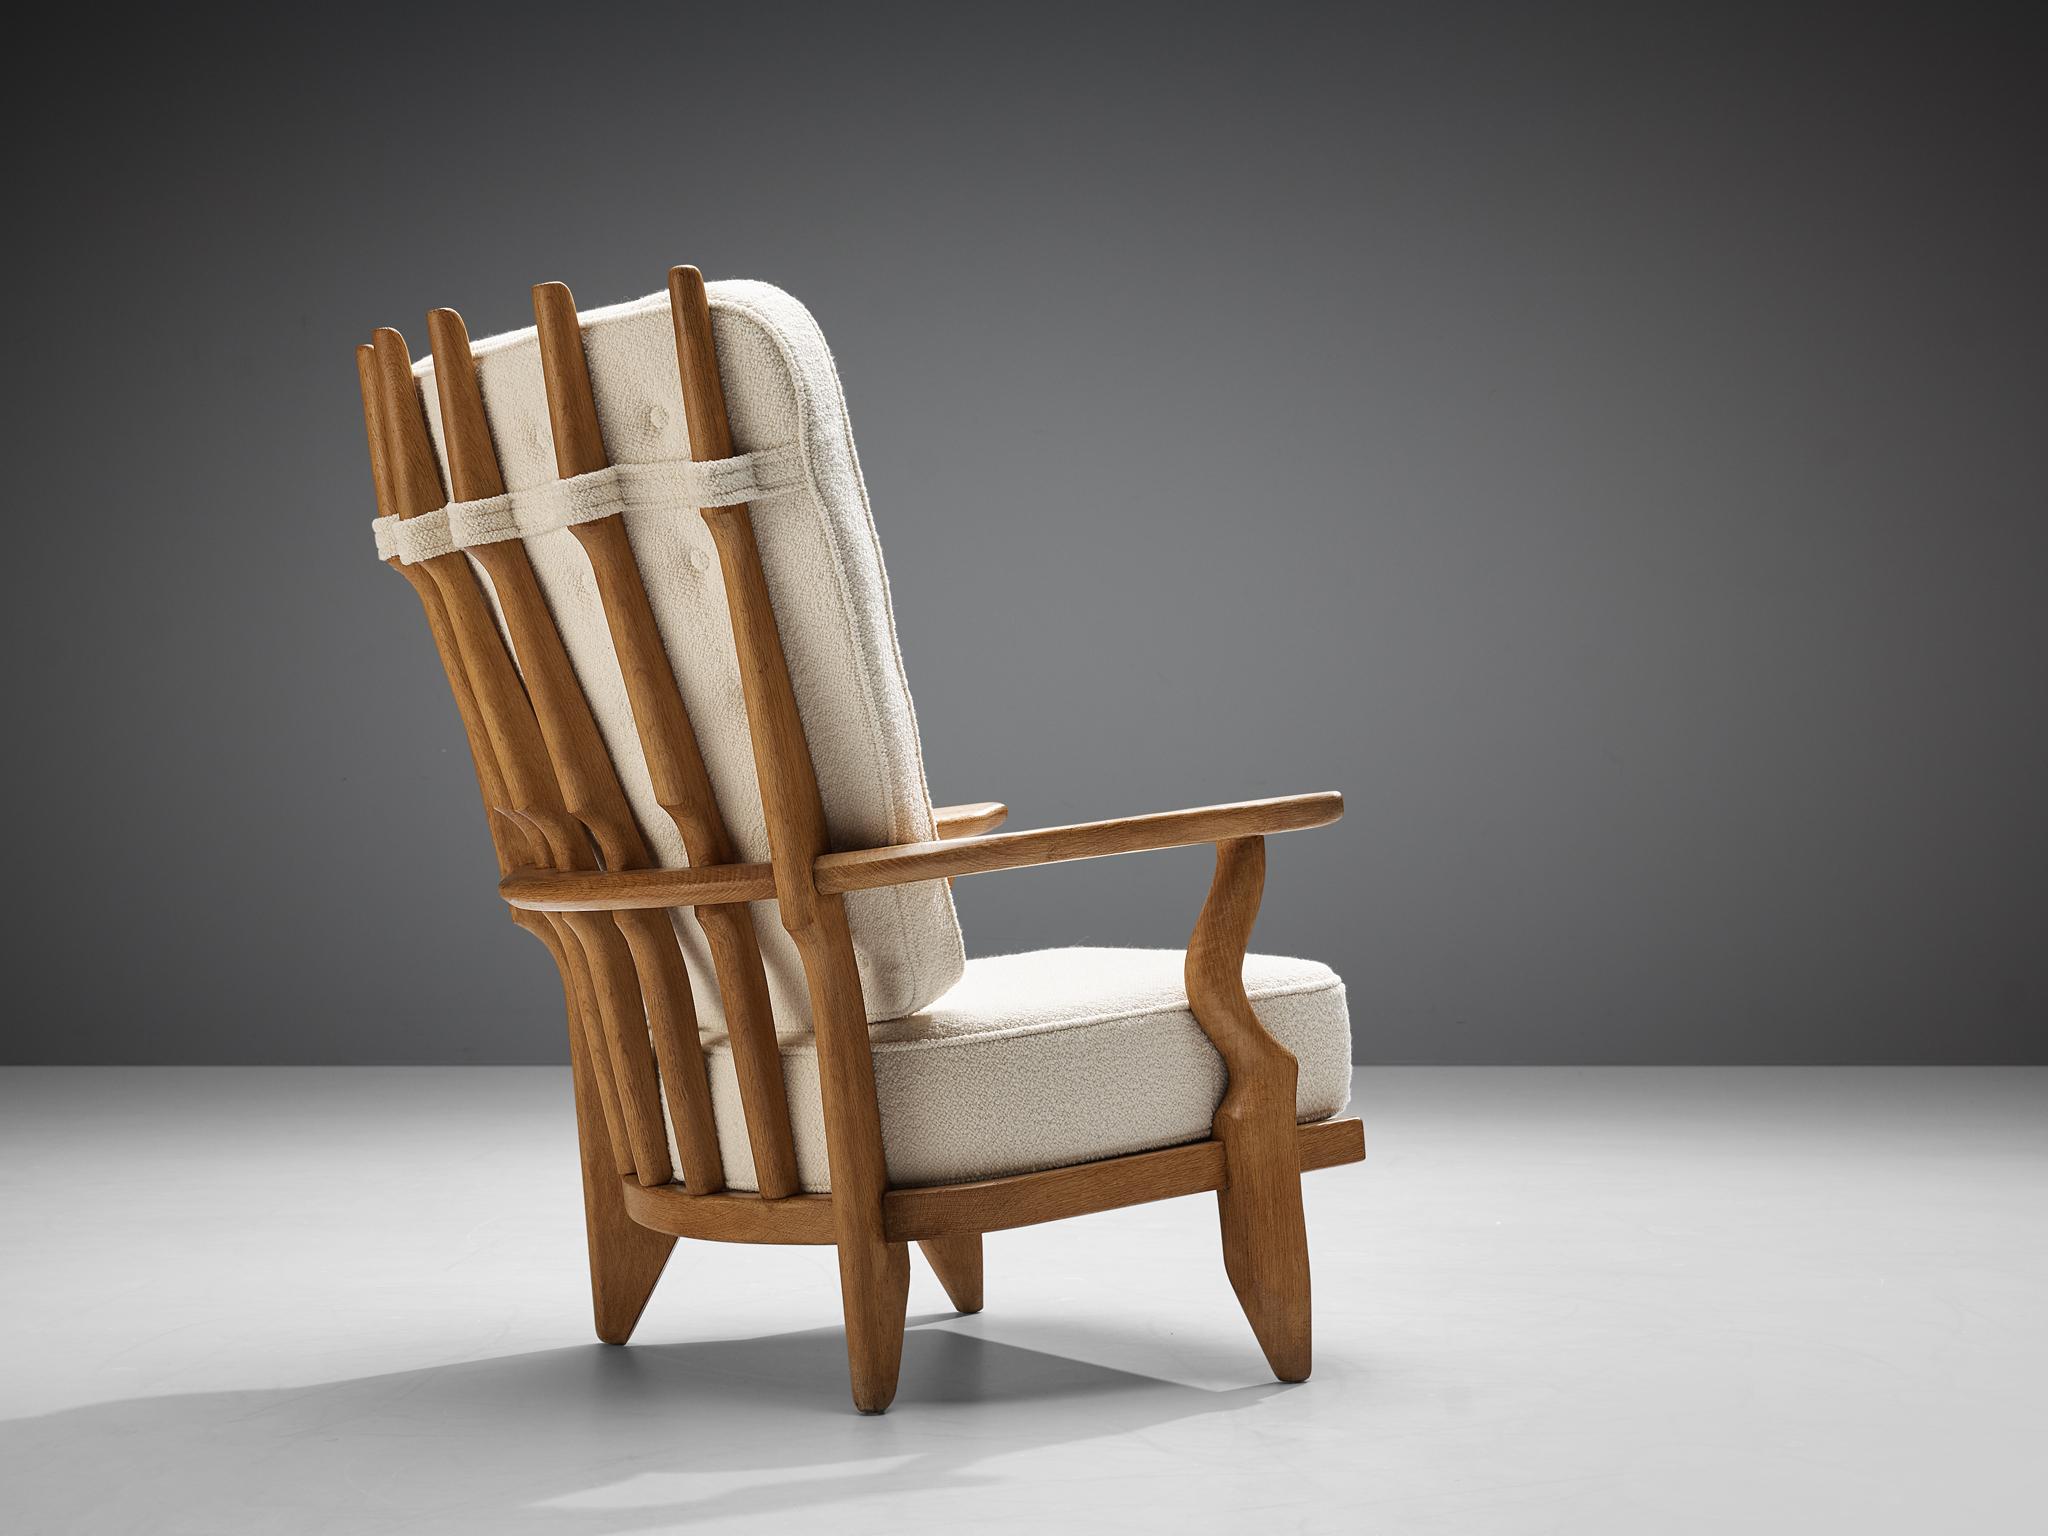 Guillerme et Chambron for Votre Maison, 'Grand Repos' lounge chair, oak, fabric, France, 1960s.

Guillerme & Chambron are known for their high-quality solid oak furniture, of which this is another great example. This chair has an interesting,